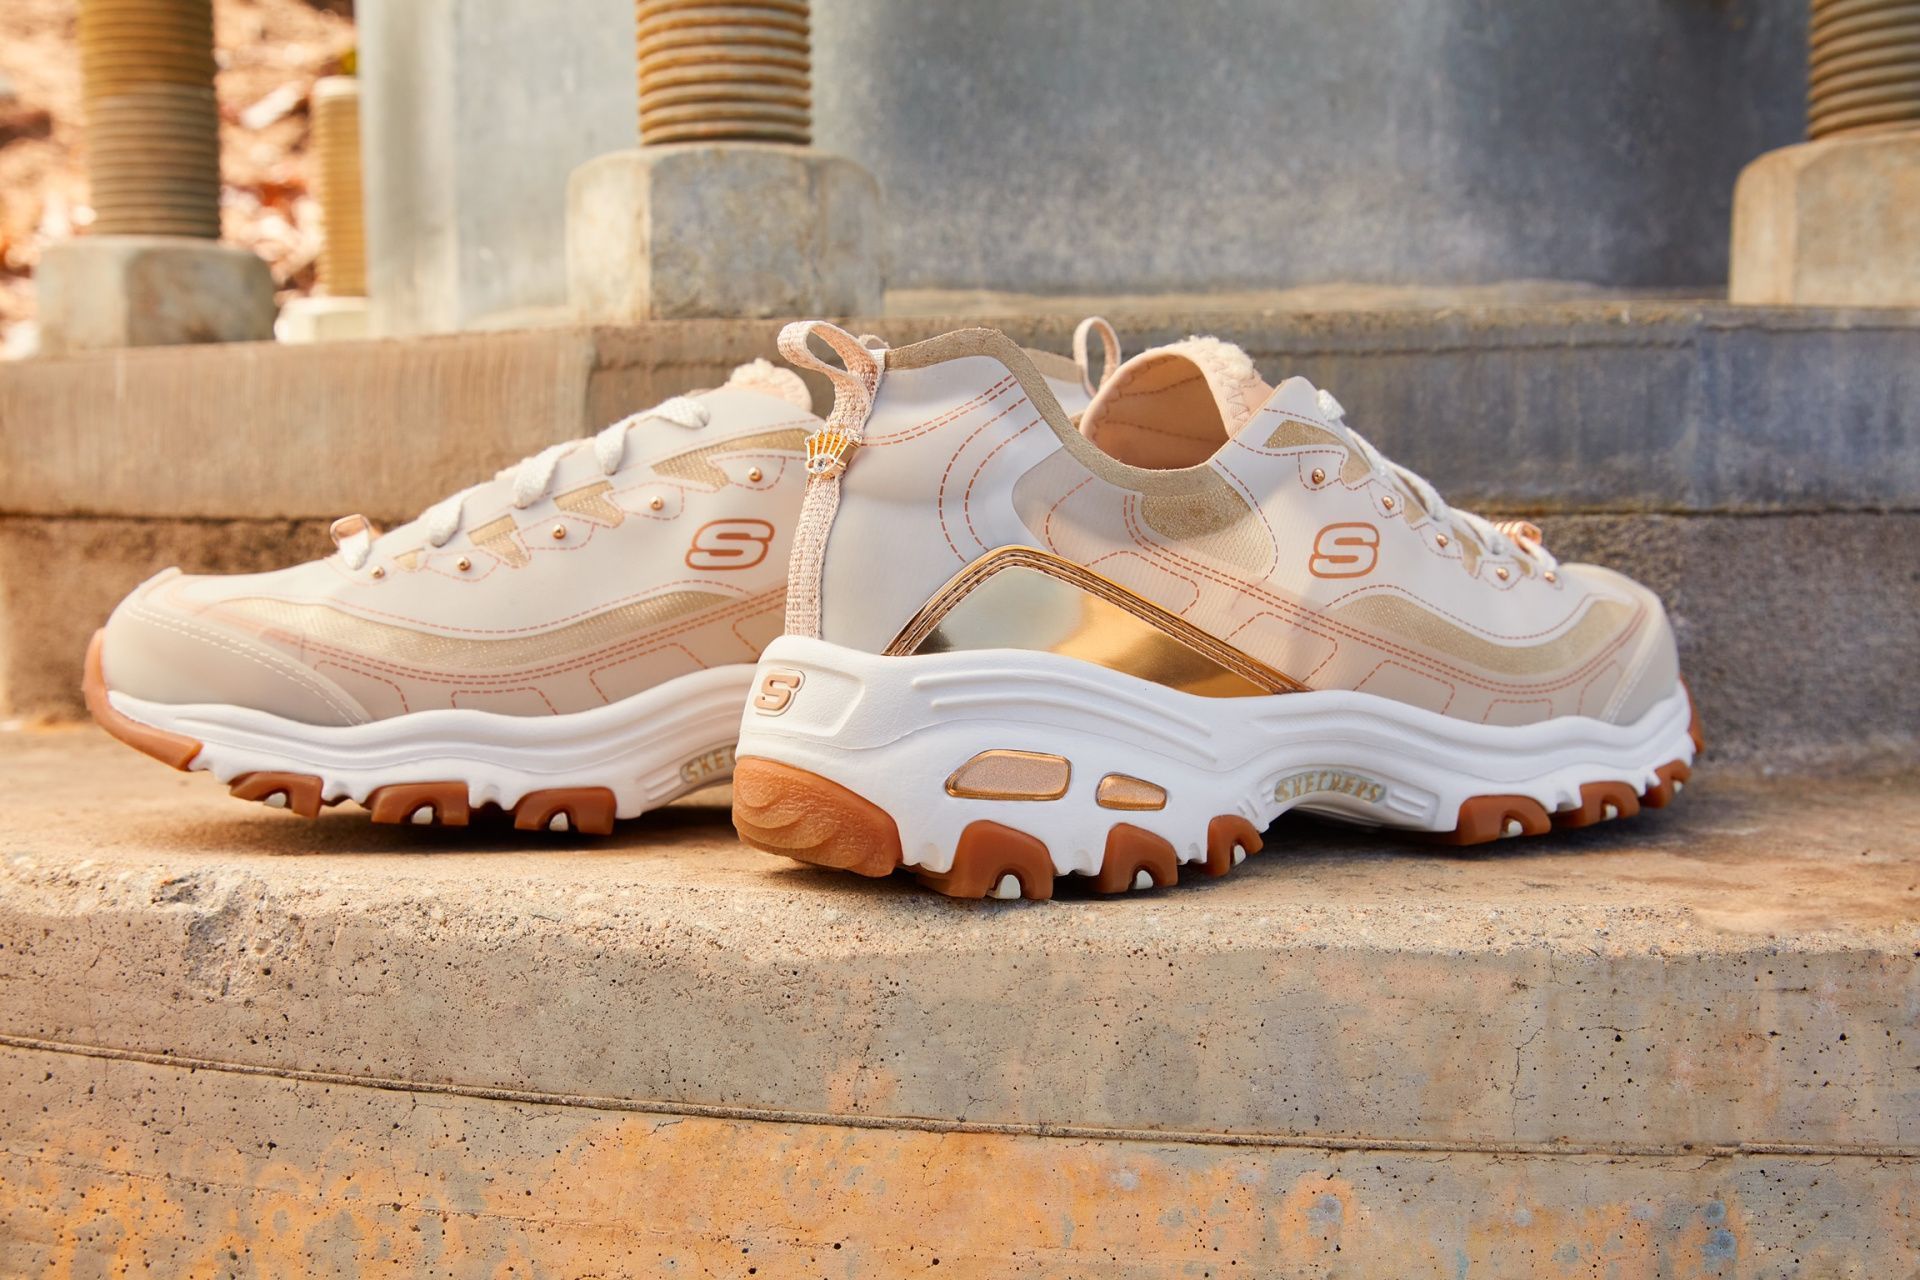 Inmersión Mejor desconectado Skechers unveils a "delicate" collection of sneakers with fringes, rivets  and chains